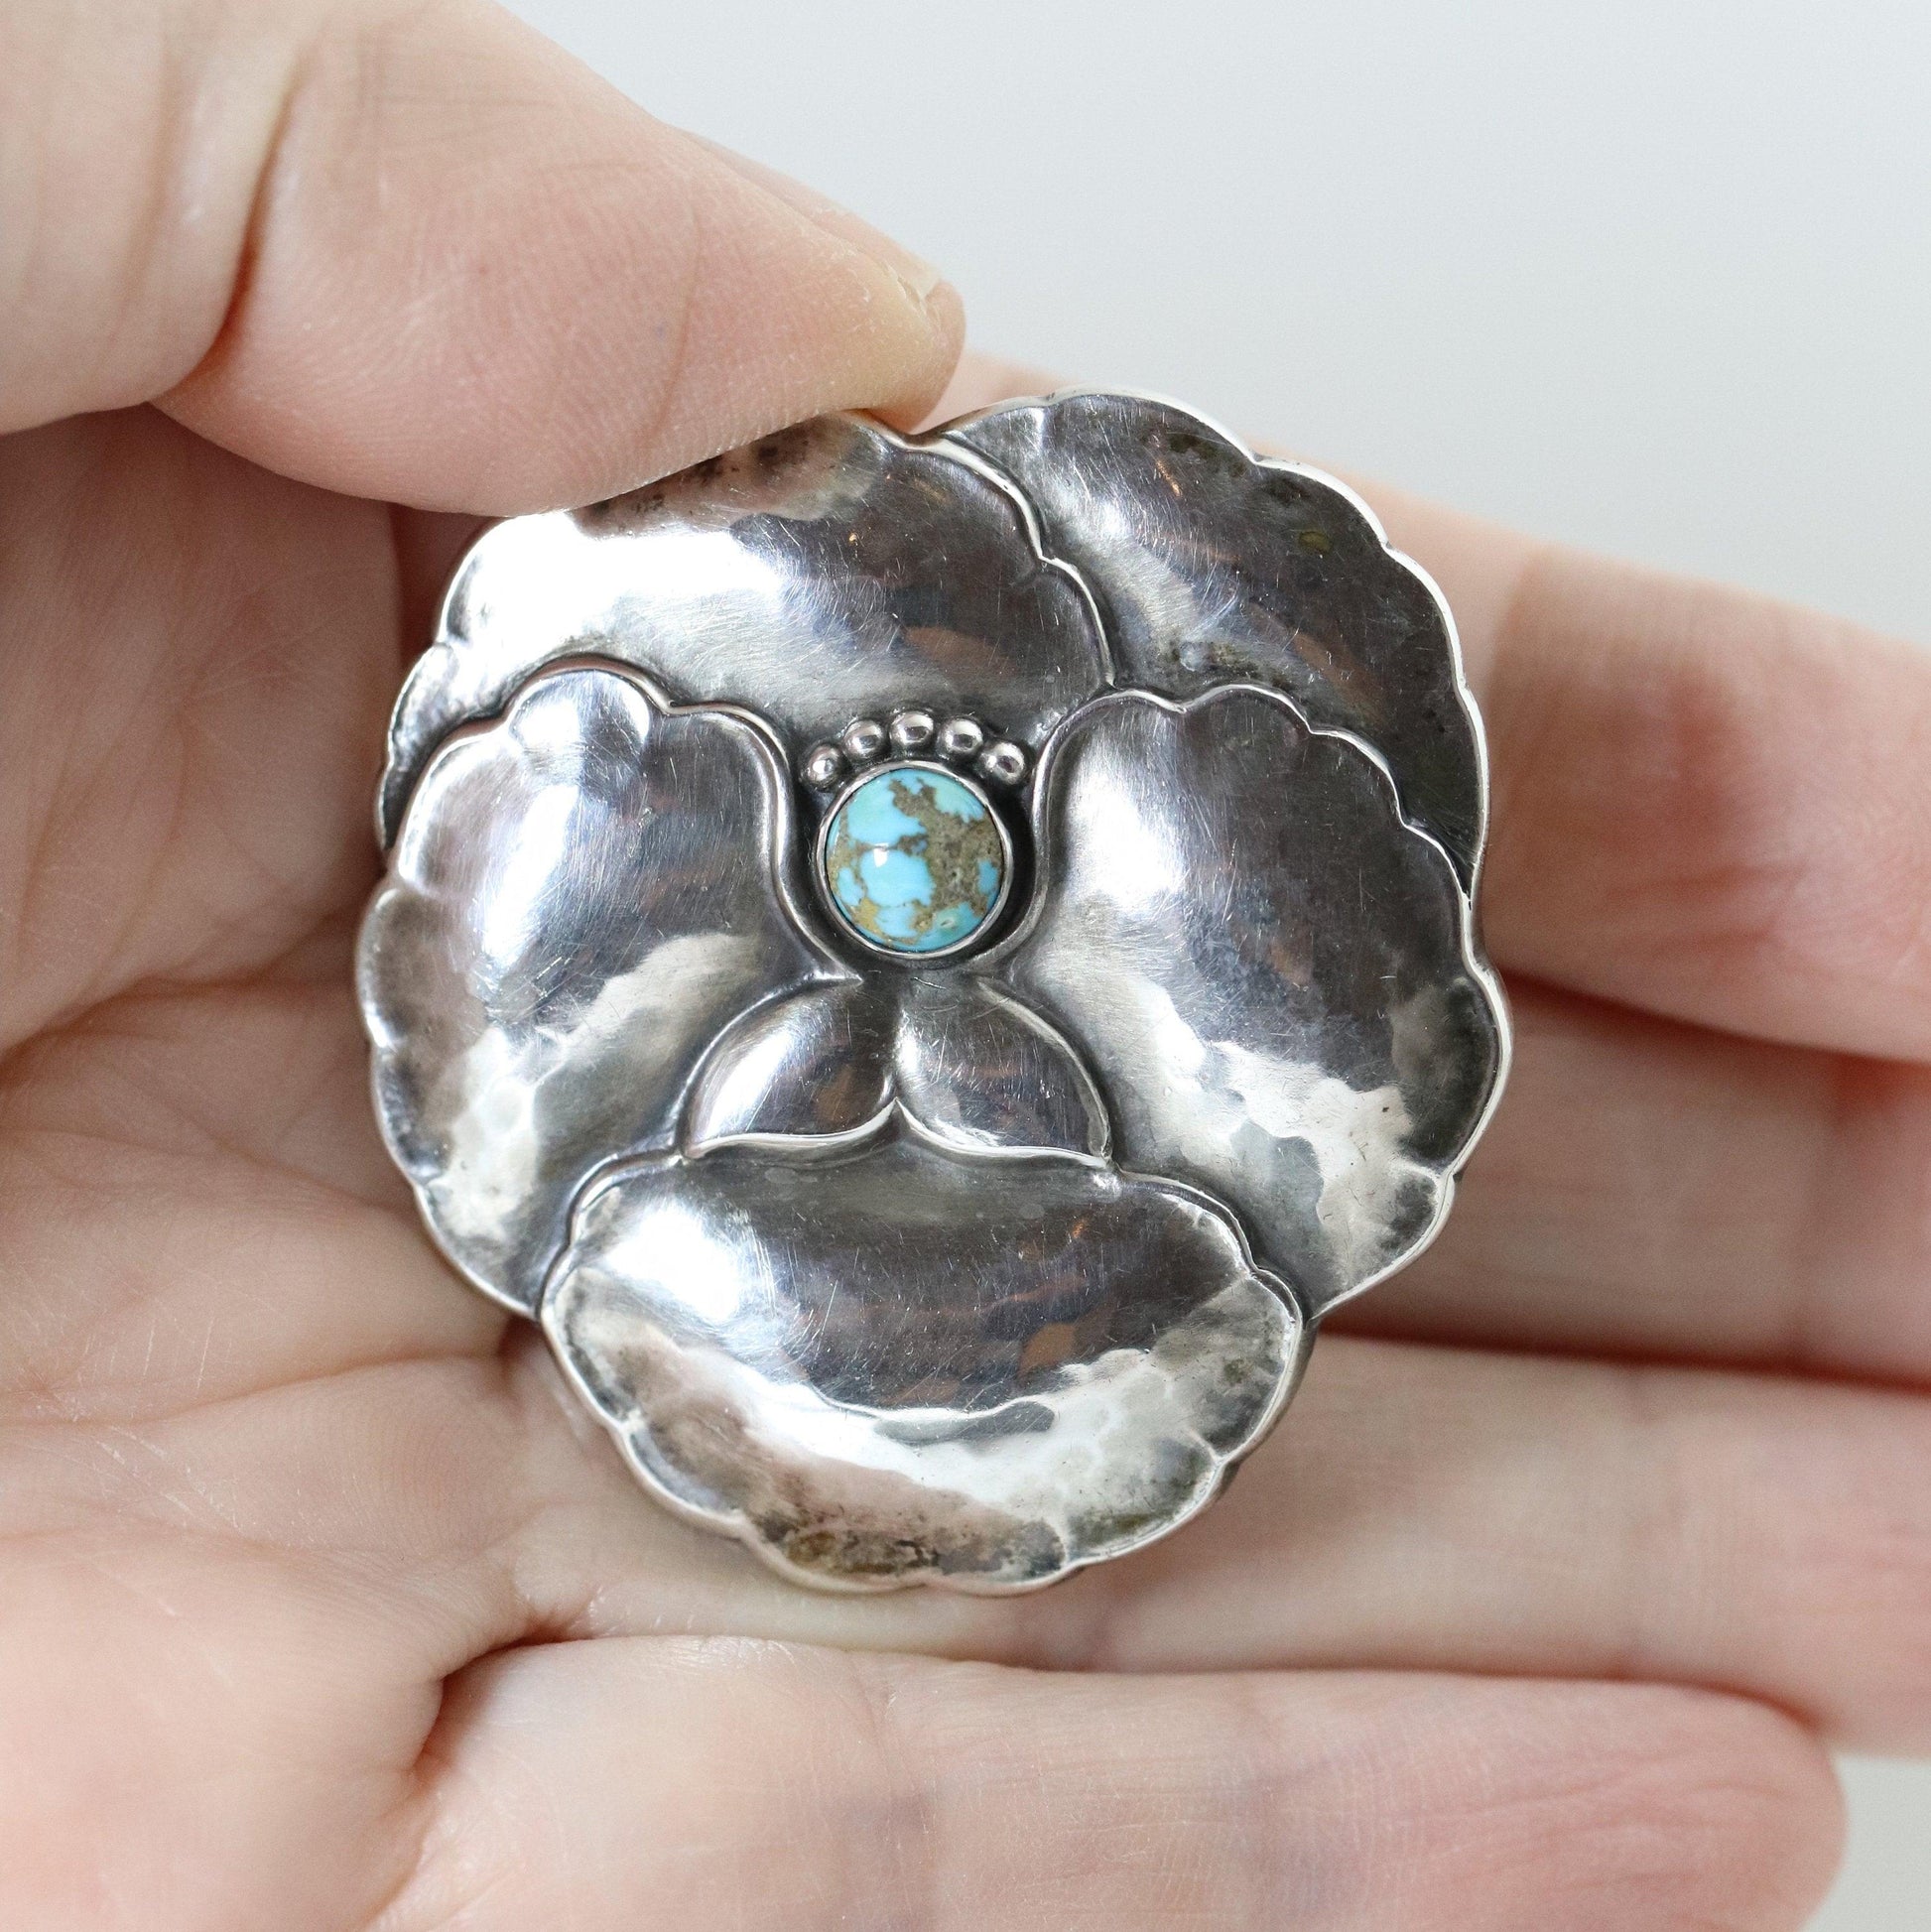 Vintage Georg Jensen Jewelry | Art Nouveau Pansy with Turquoise Brooch 113 - Carmel Fine Silver Jewelry